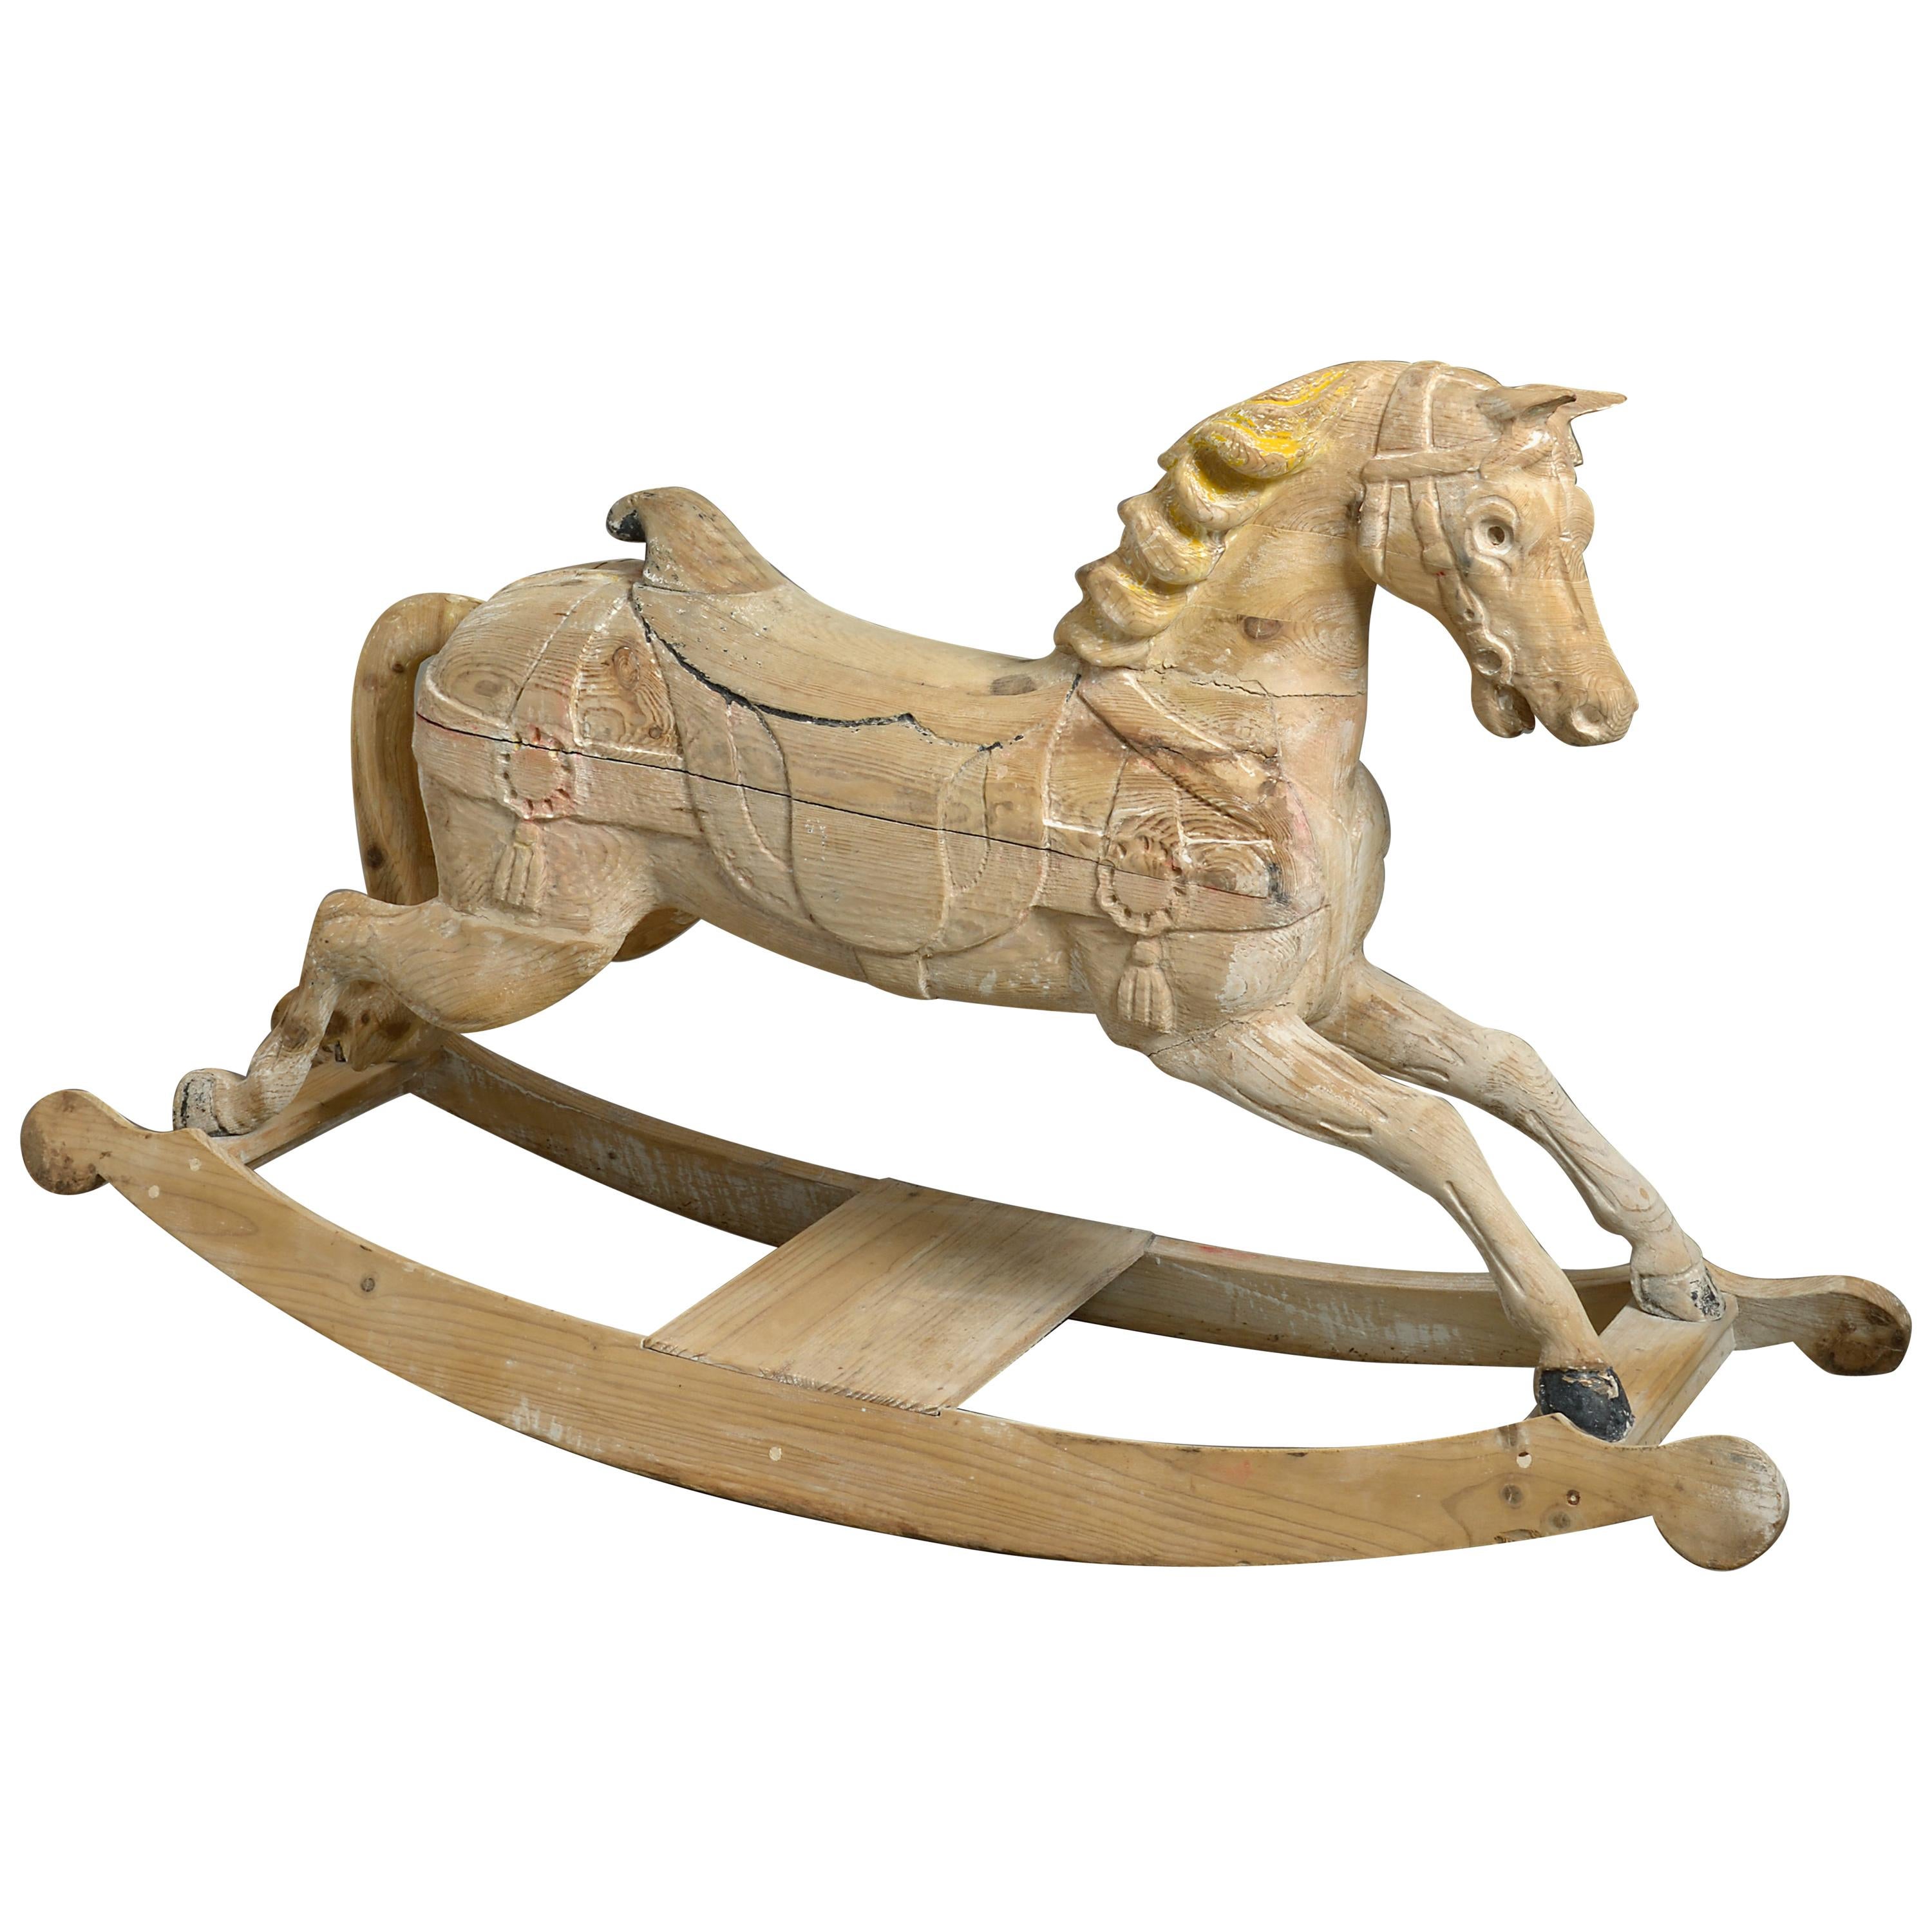 19th Century Victorian Carved Wooden Carousel Rocking Horse